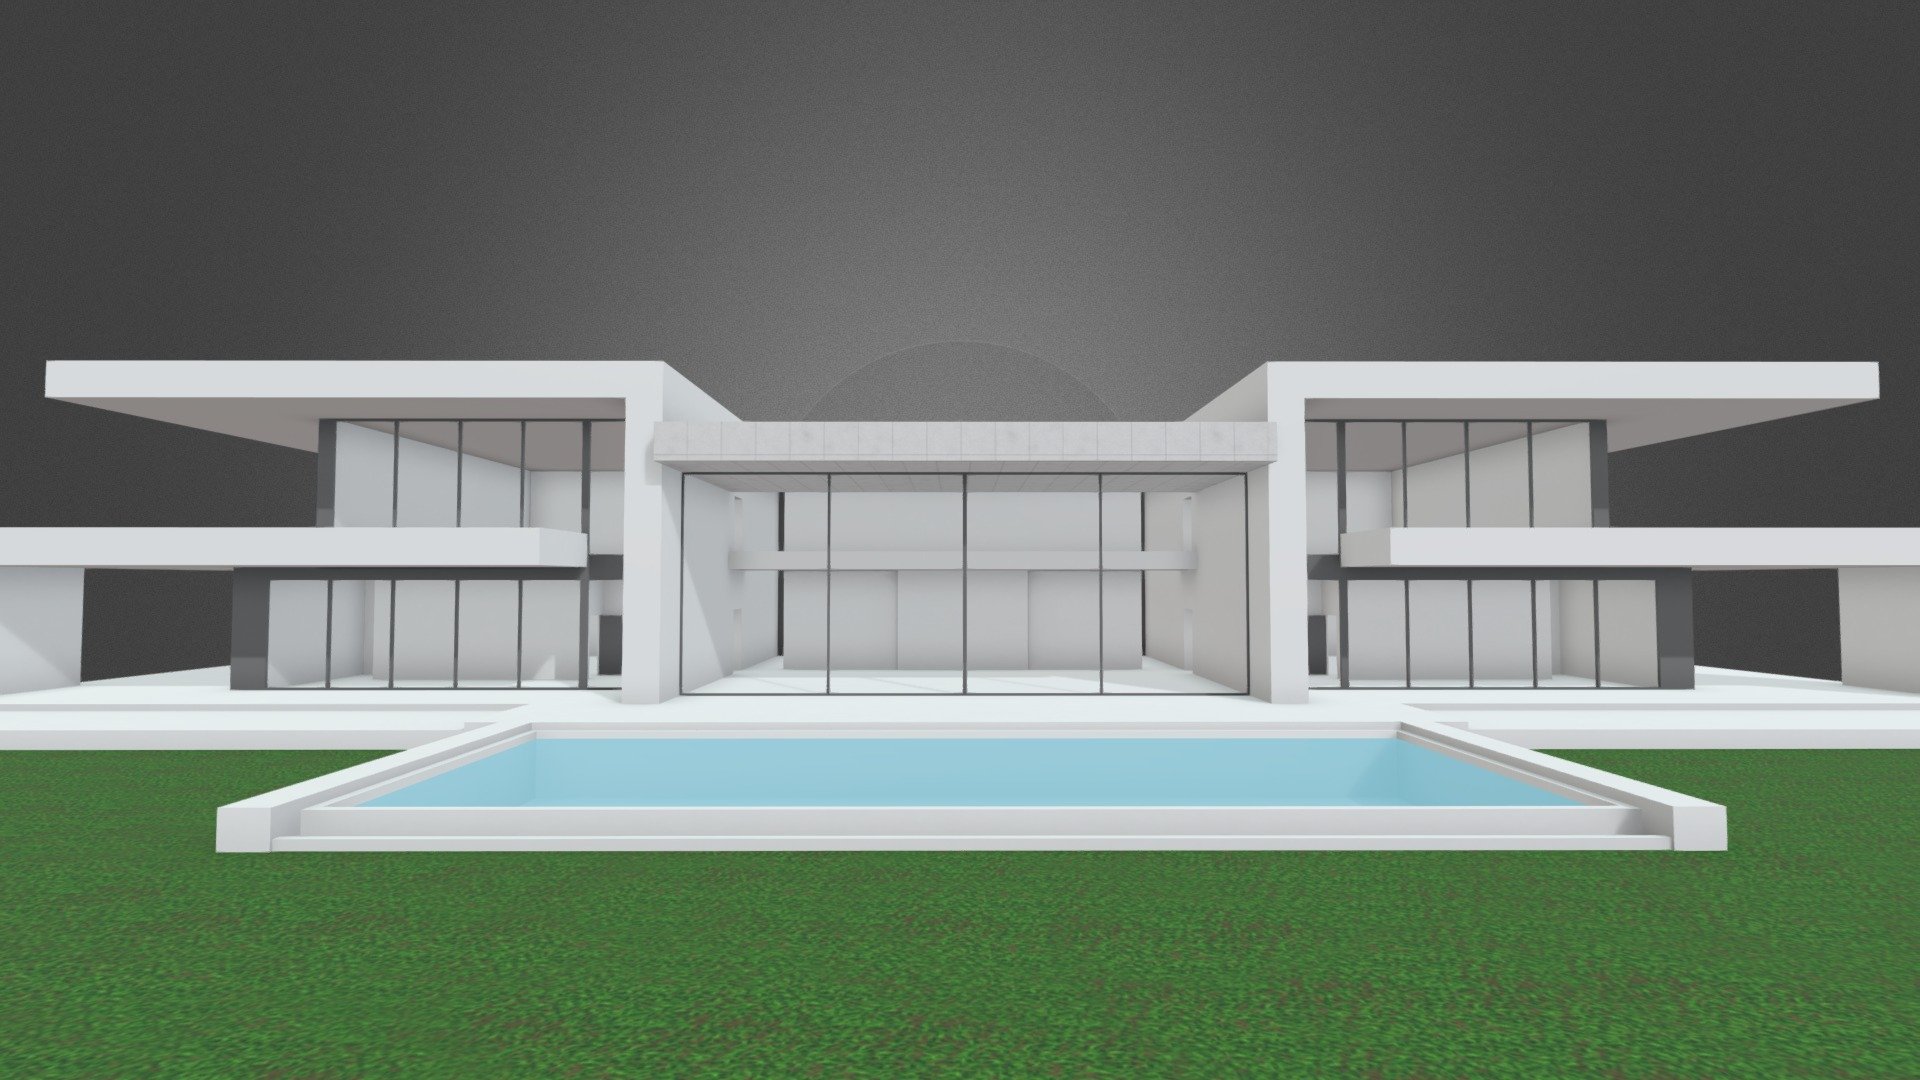 3d model of modern Building. It is ready to use, just put it into your scene. Format FBX file size : 96KB

Click on the link to see more models : https://sketchfab.com/GbehnamG/store

If you need personalized 3d models , feel free to contact at: mr.gbehnamg@yahoo.com - Modern villa design June 2022 - Buy Royalty Free 3D model by BehNaM (@GbehnamG) 3d model